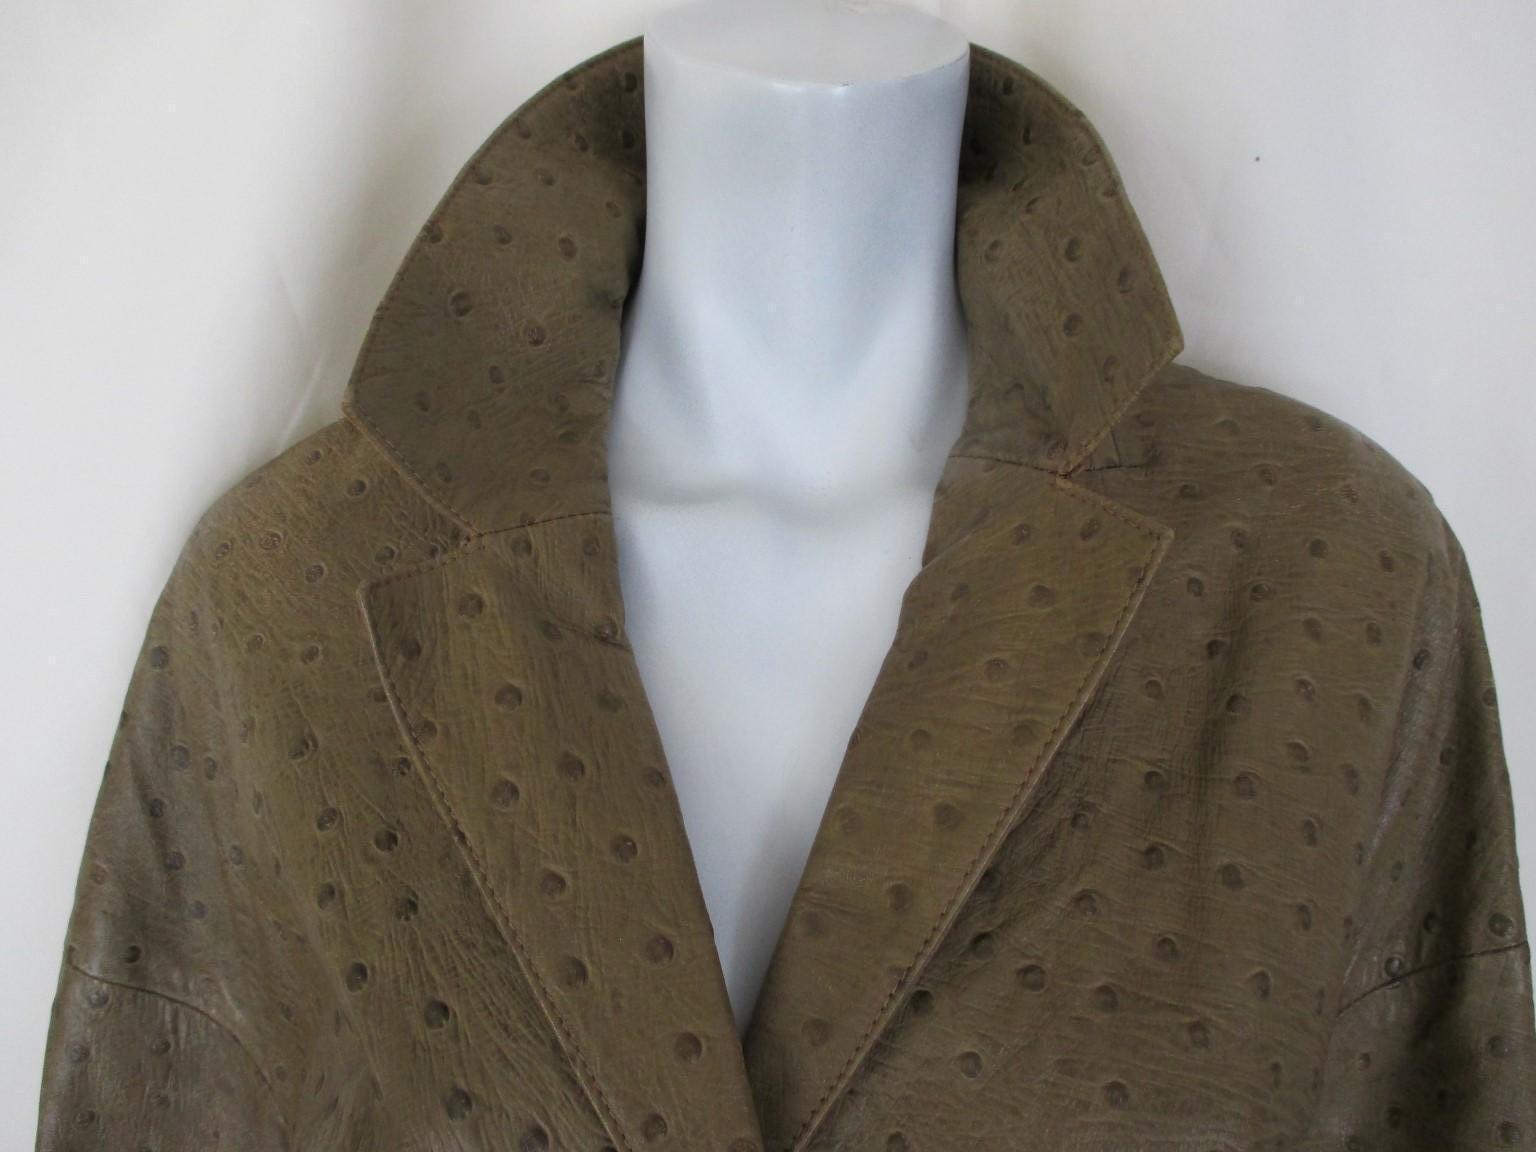 This vintage natural ostrich leather coat has 2 pockets and 3 buttons.
Color: olive green
Rare, not easy to find.
Its in fair vintage condition, some wear at the leather and inside lining at the sleeves.
Size is marked EU 42

Please note that